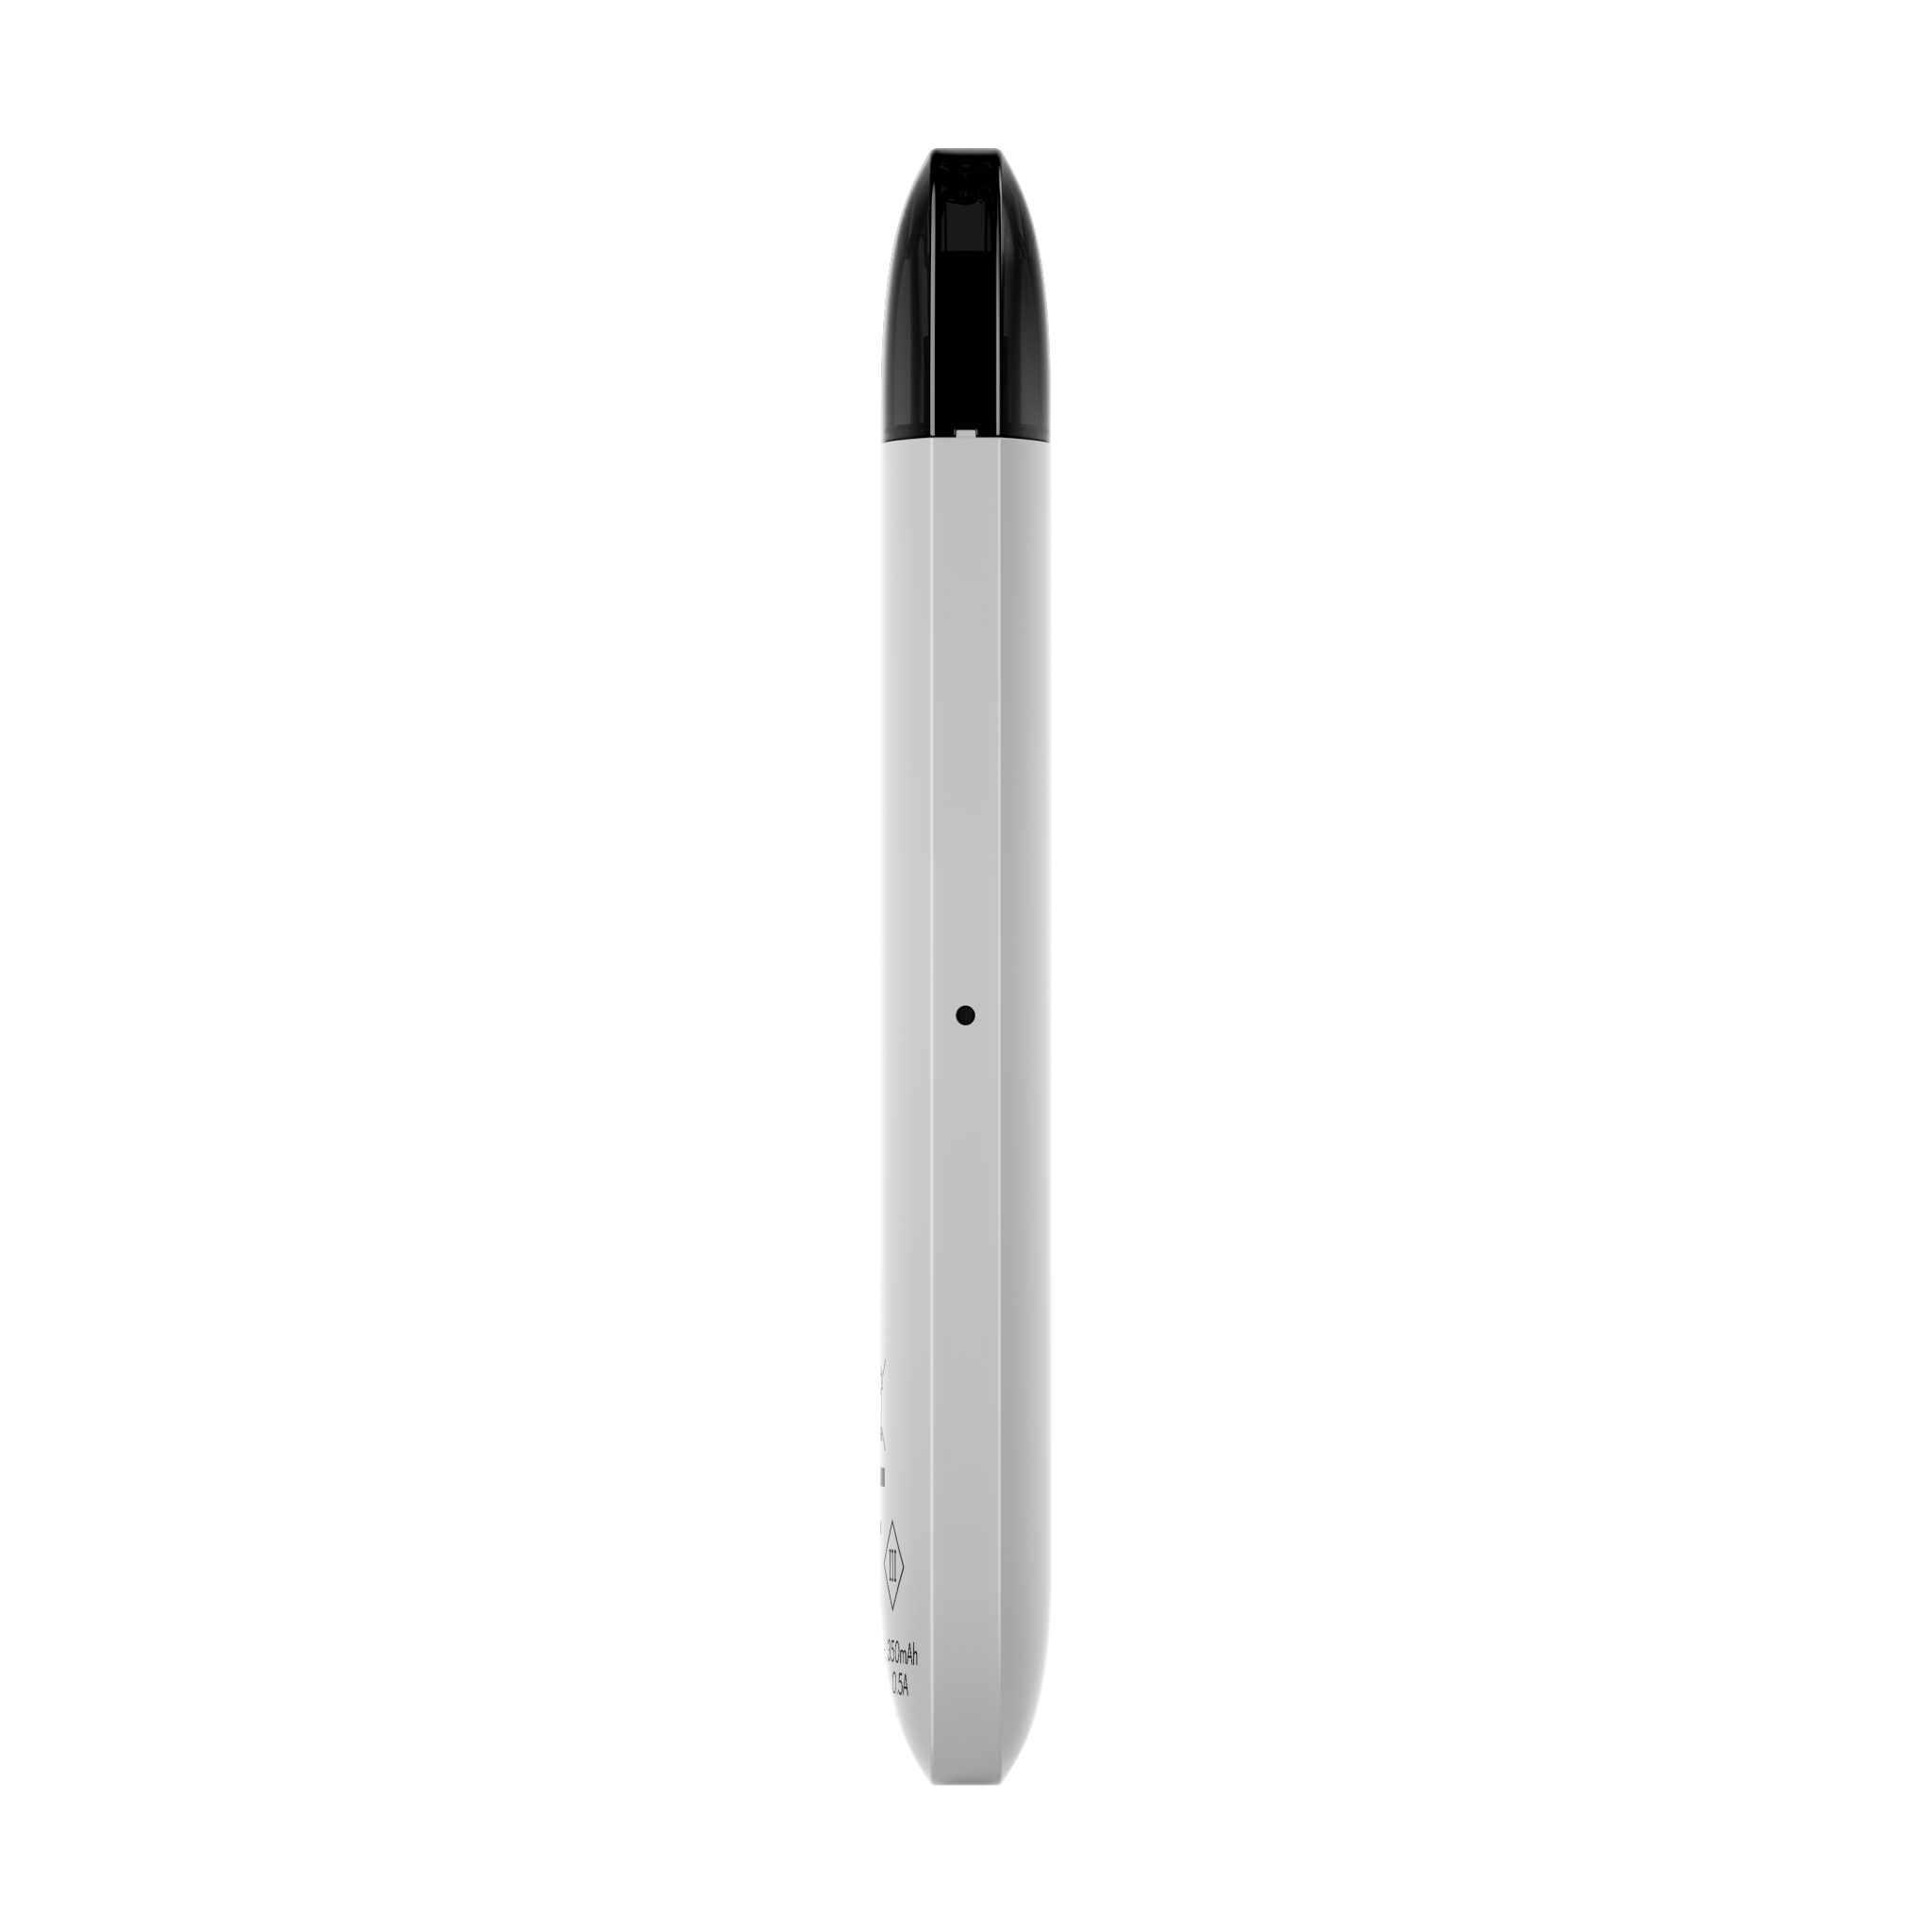 PS ONE CLOSED POD SYSTEM VAPING DEVICE- SILVER - My Vapery South Africa